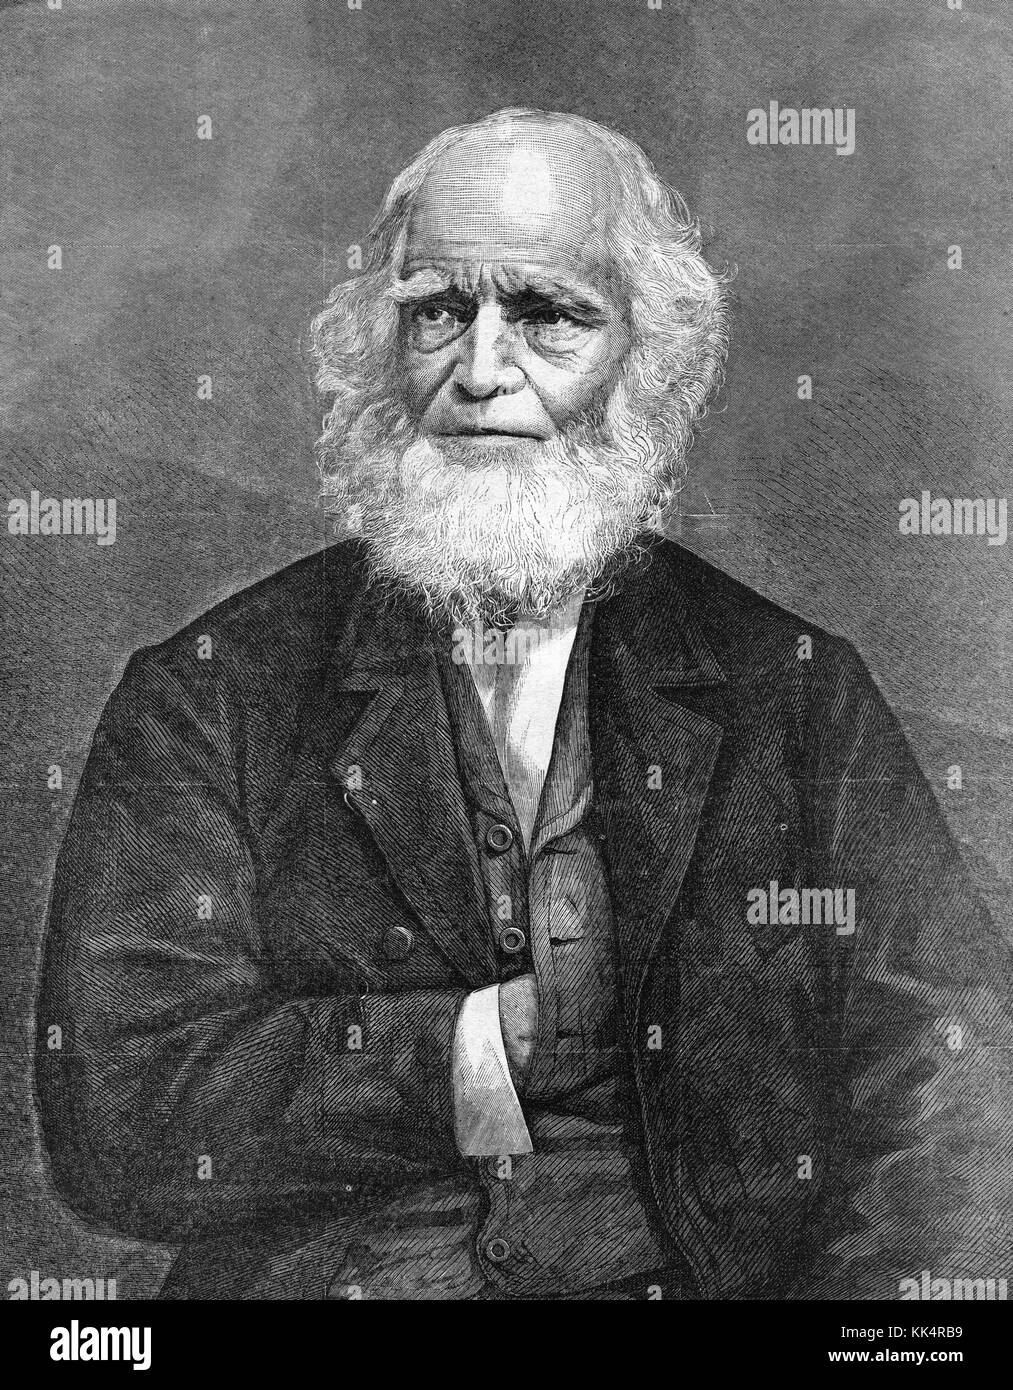 Stipple engraving portrait of William Cullen Bryant, an American romantic poet, journalist, and long-time editor of the New York Evening Post, sitting, with his hand in his vest, New York, 1870. From the New York Public Library. Stock Photo